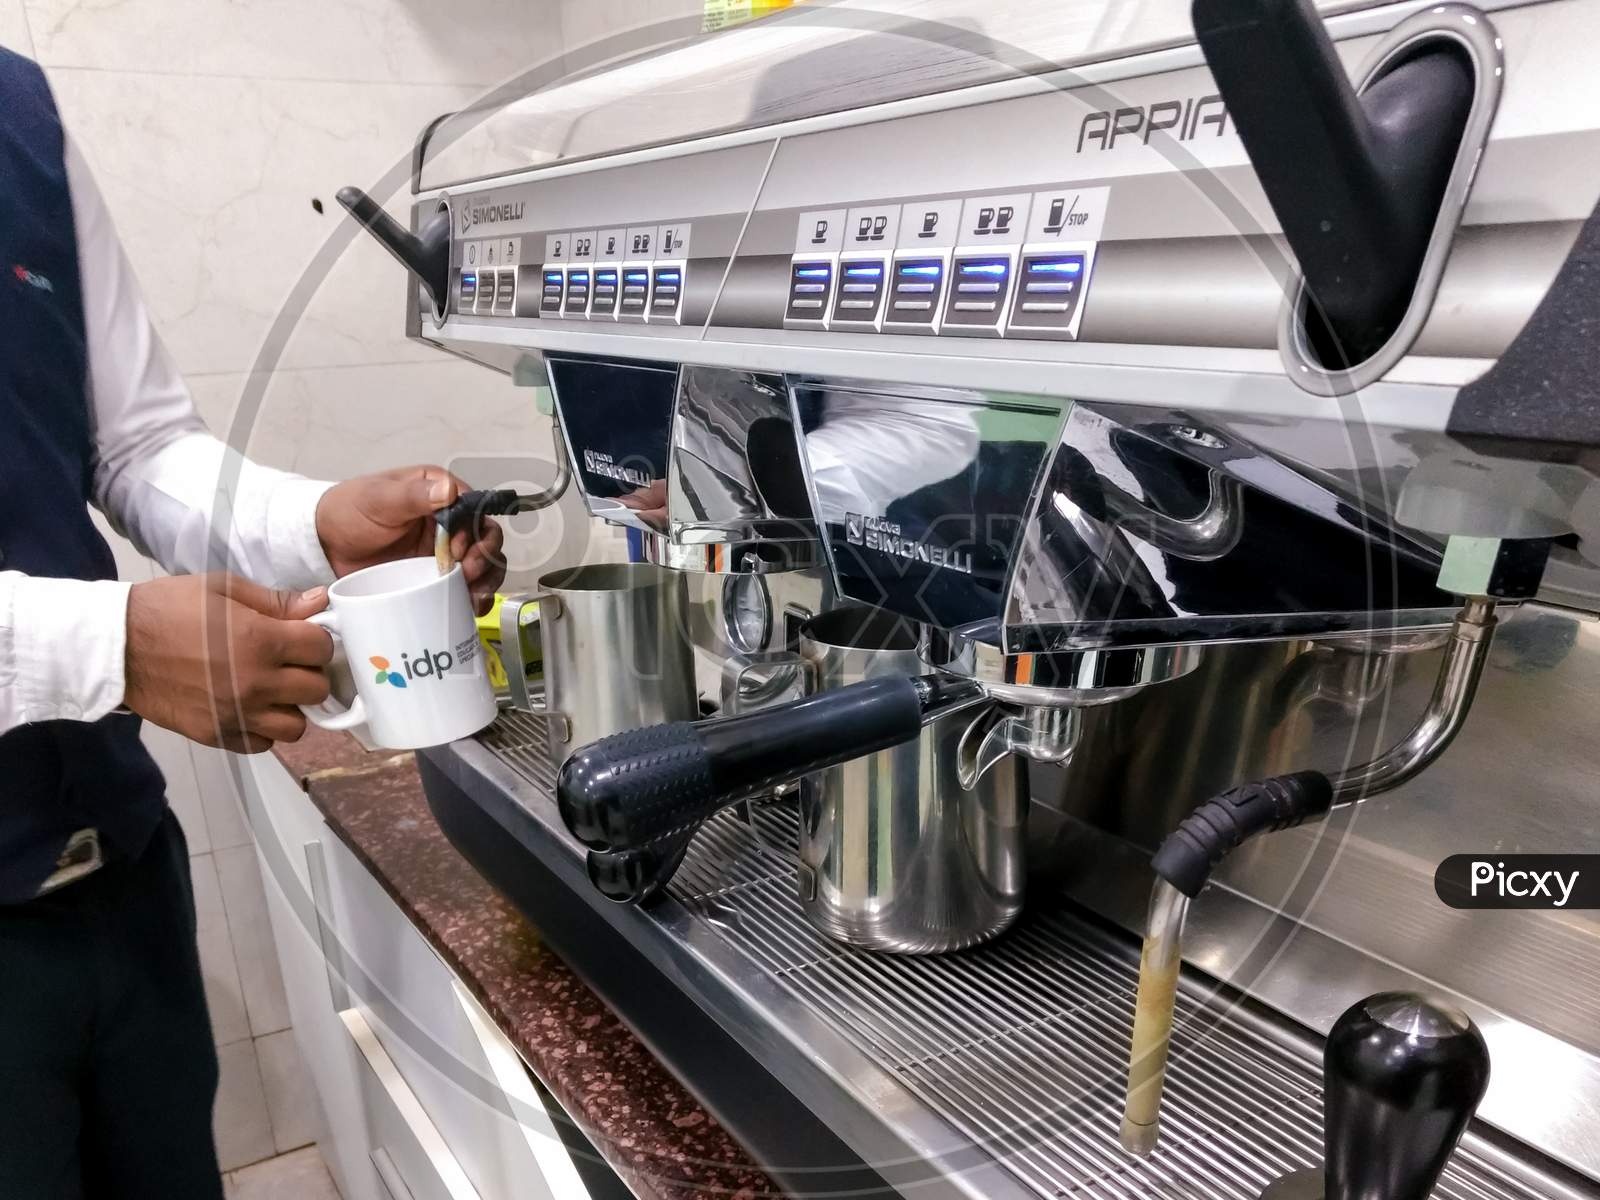 New Delhi, India - June 5, 2019 : Prepare Espresso Coffee And Various Menus With Coffee Makers In The Shop Close-Up View